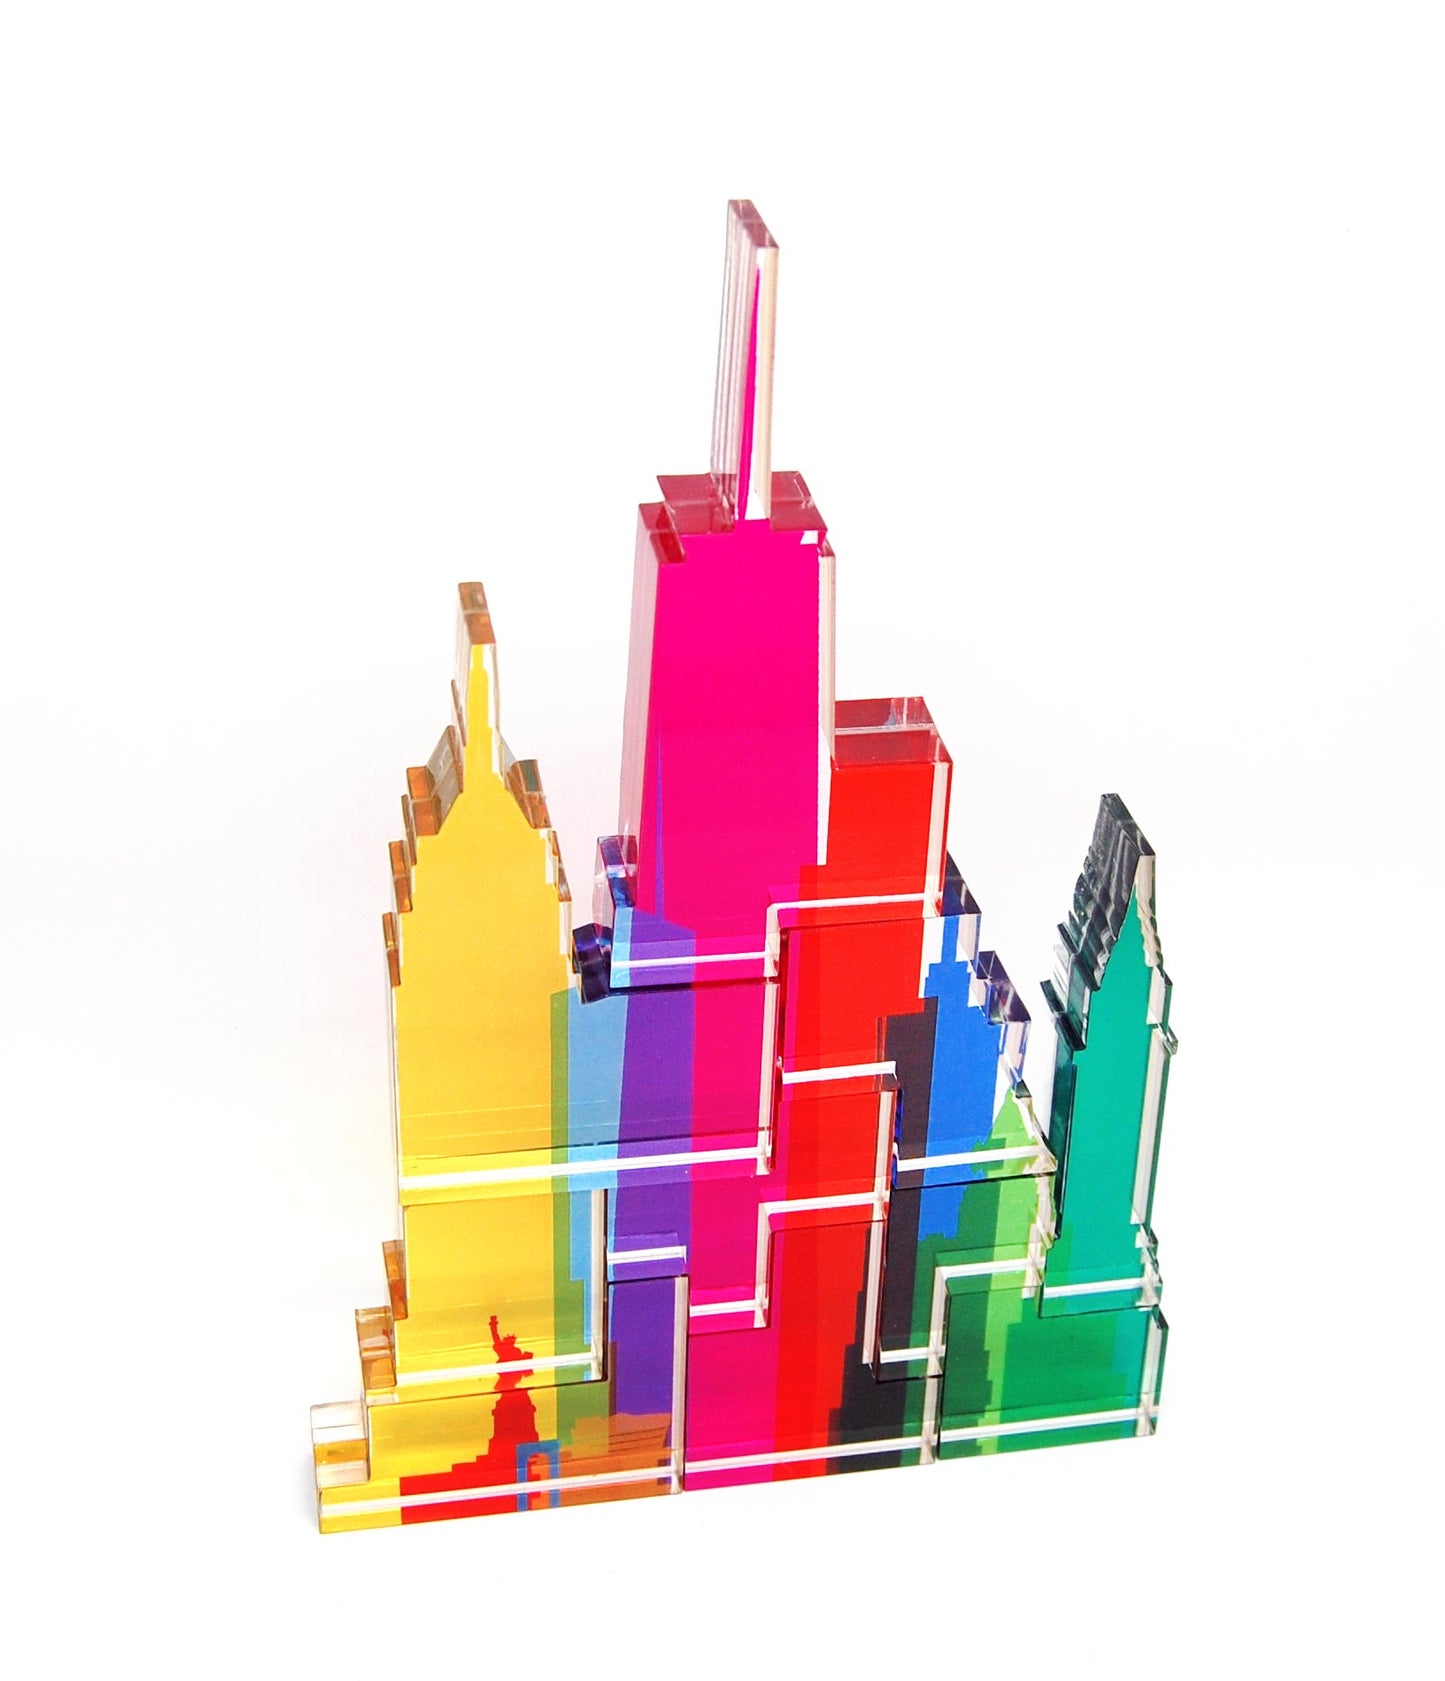 Shapes of Cities puzzles